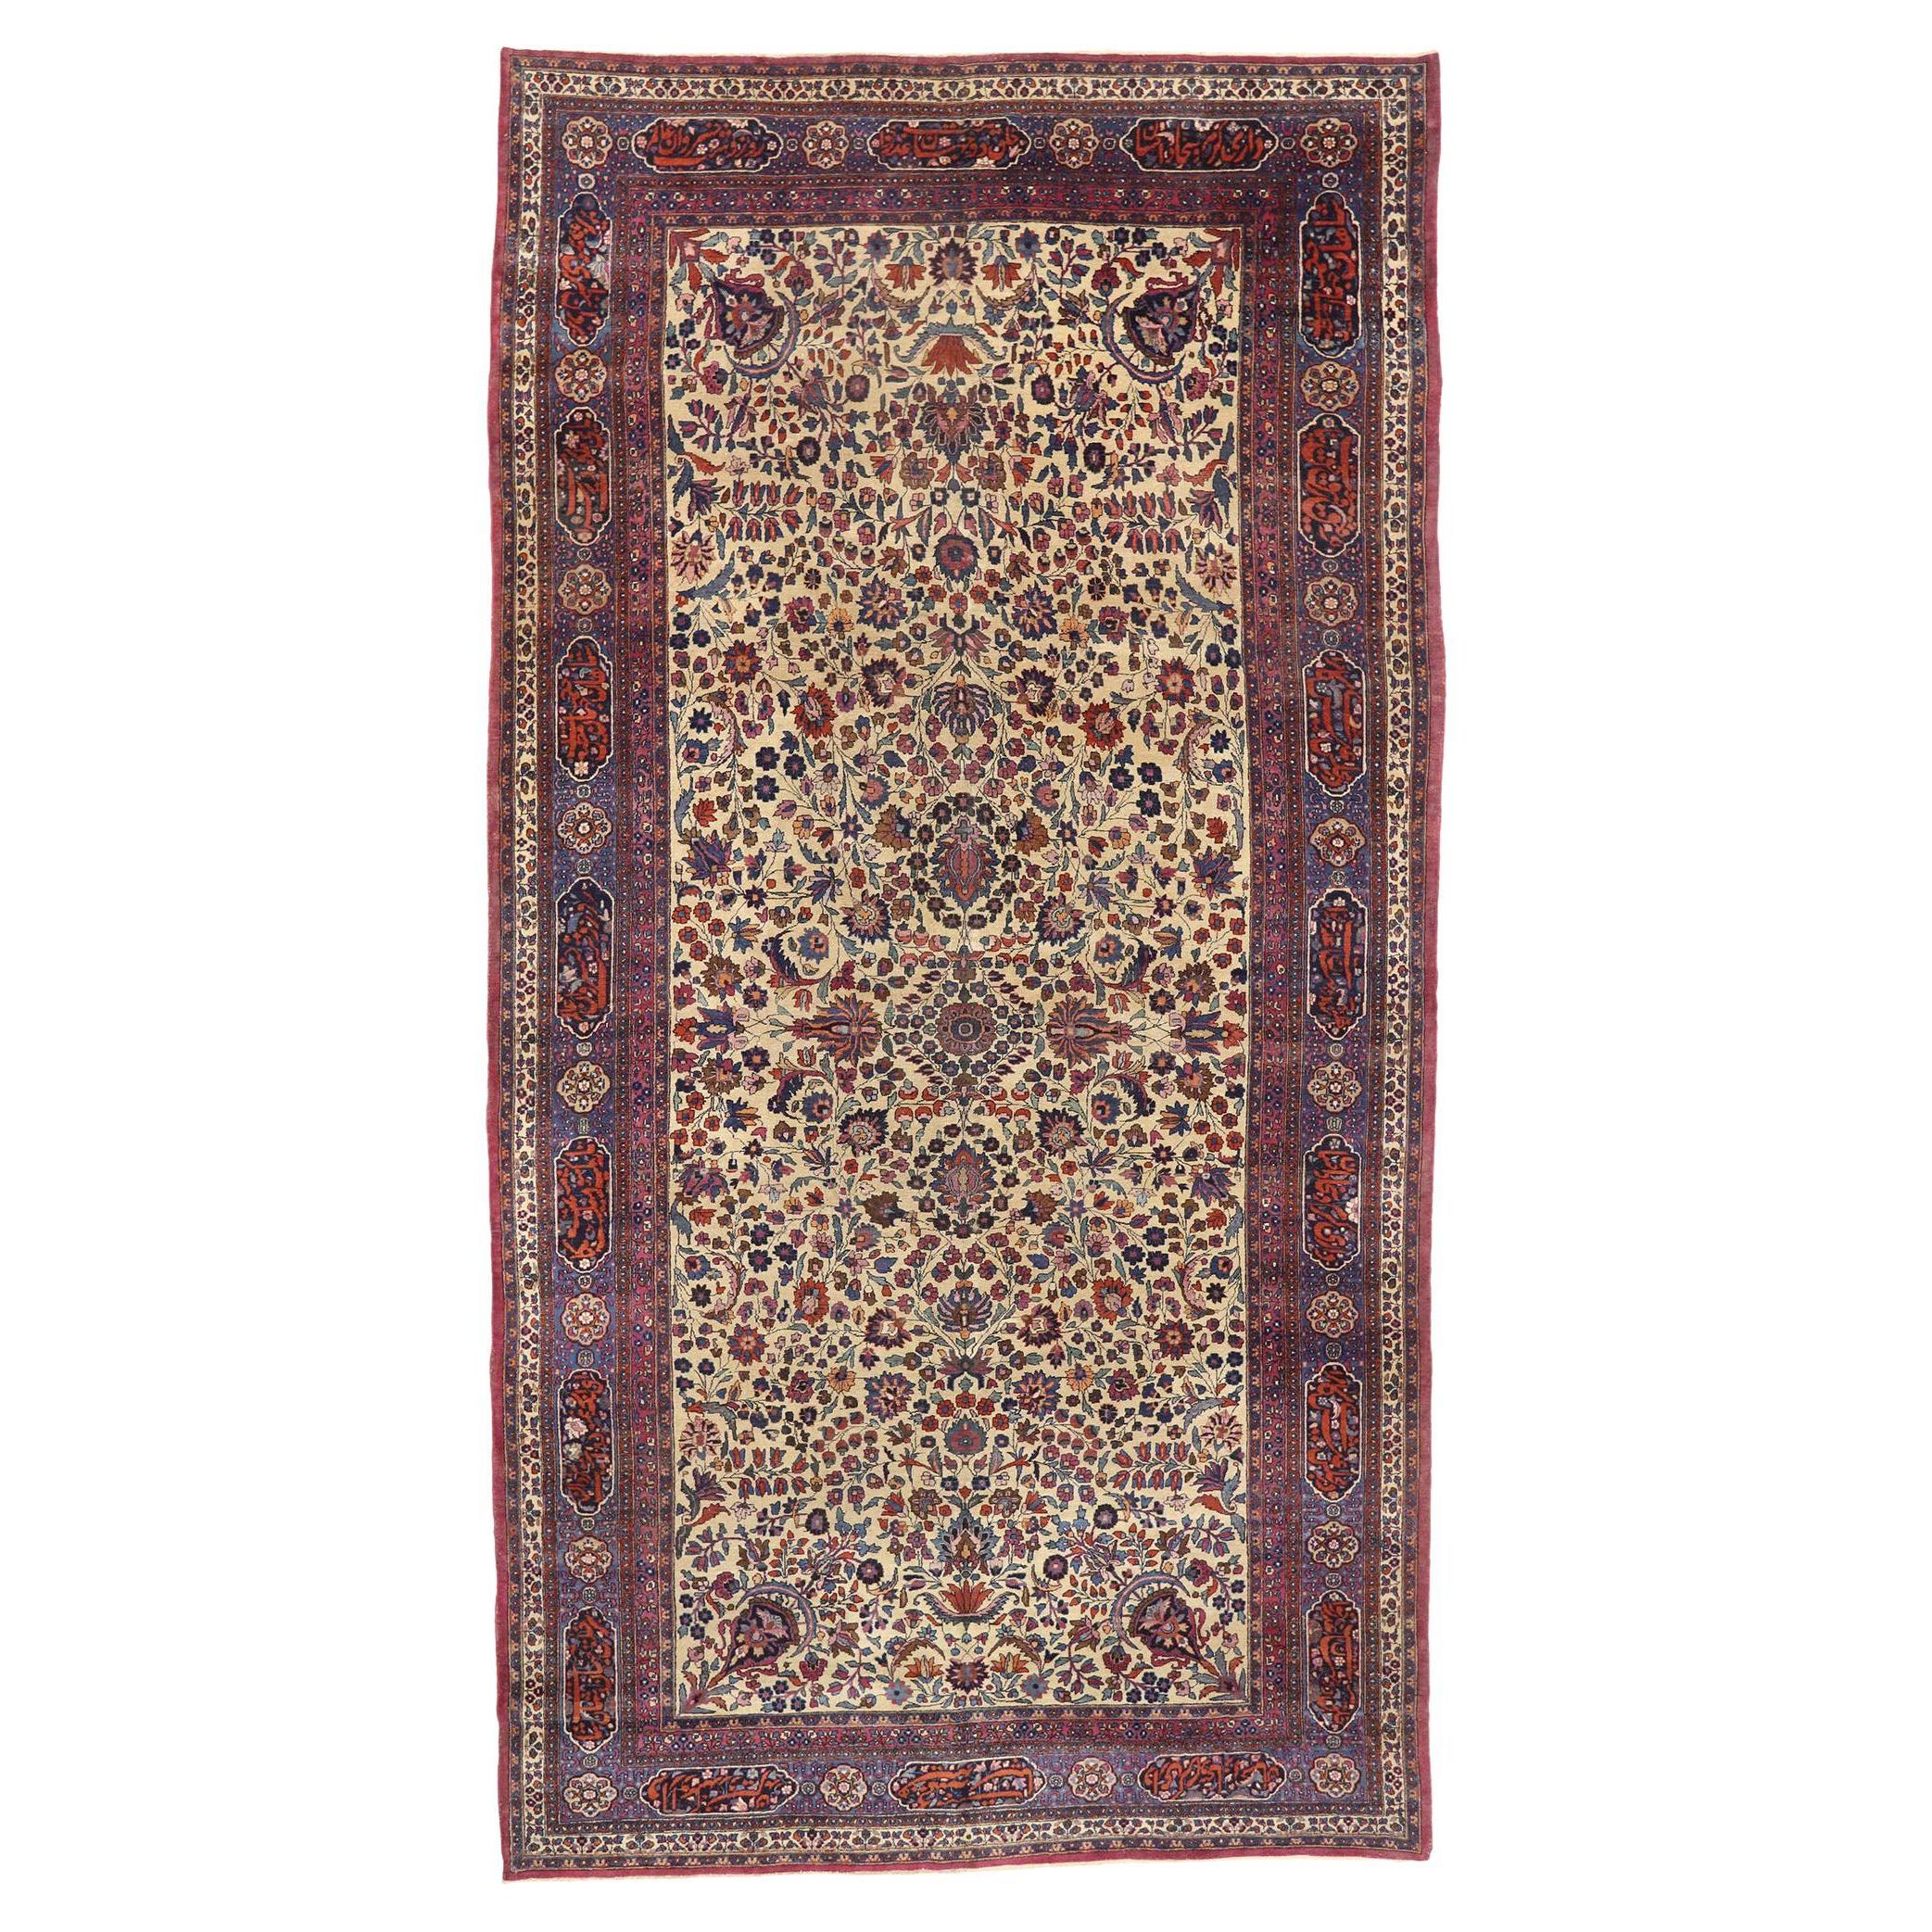 Antique Persian Mashhad Palace Size Rug with Venetian Ottoman Style